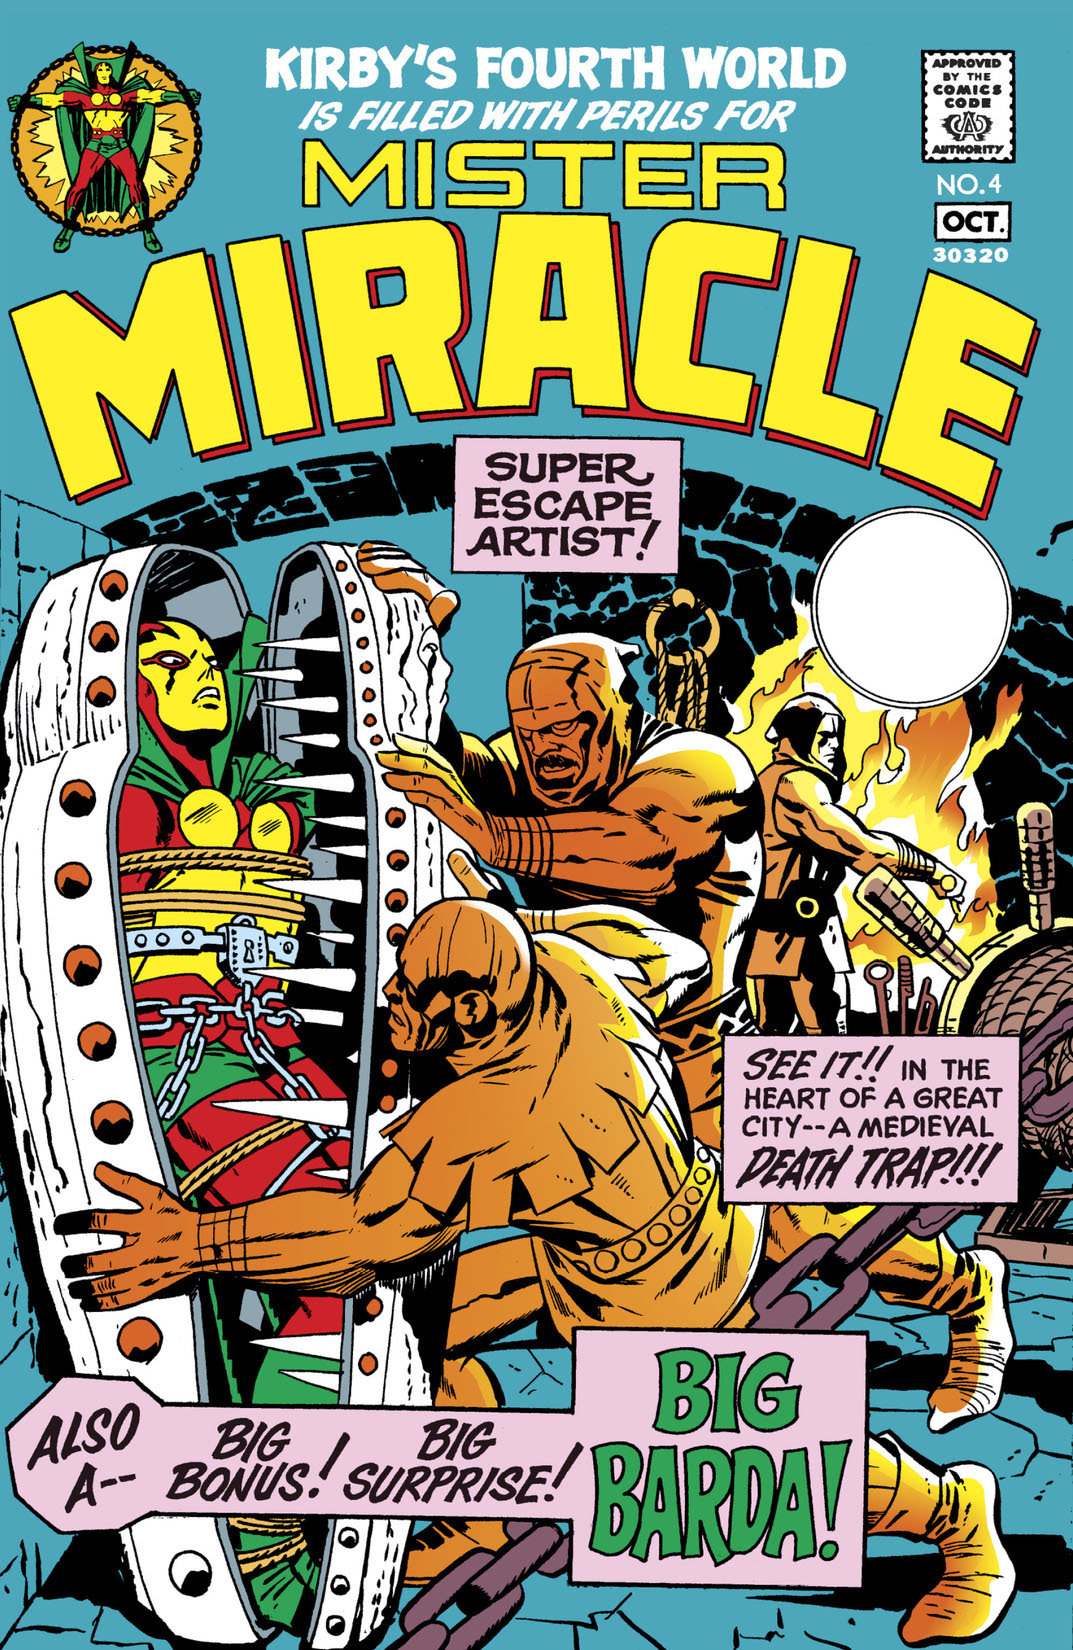 Mister Miracle (1971-) #4 preview images